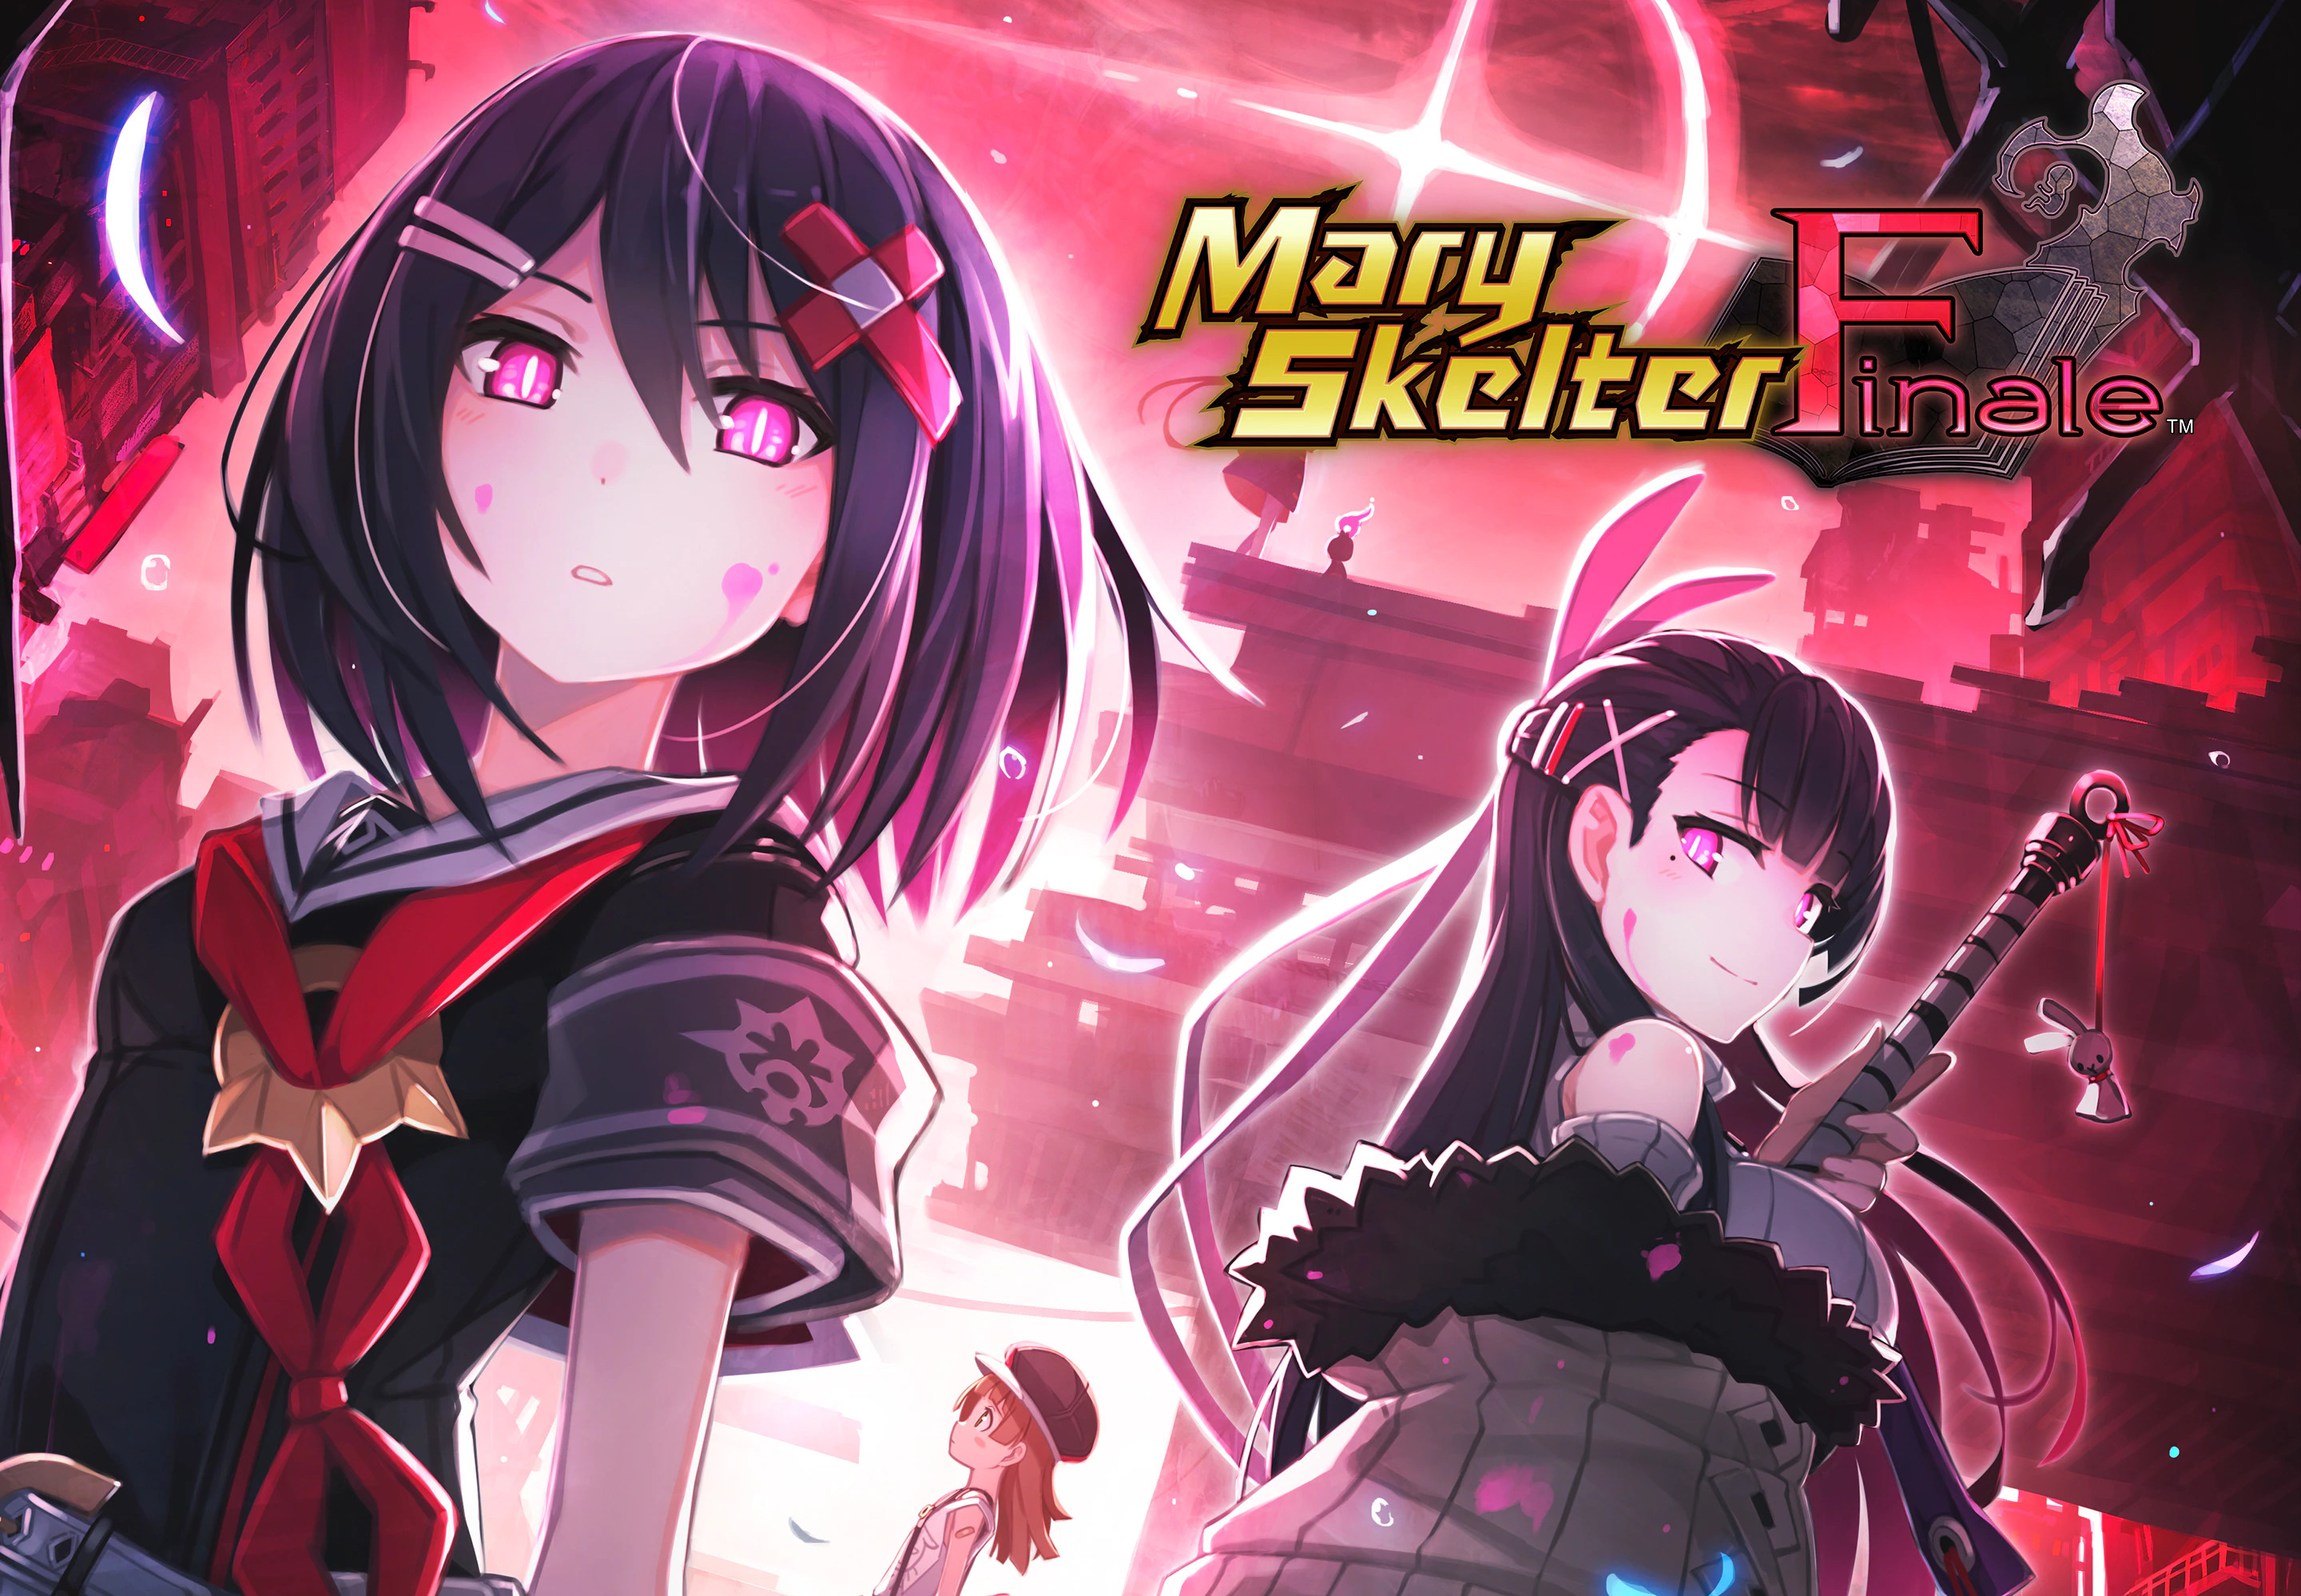 Mary Skelter Finale NA PS4 CD Key